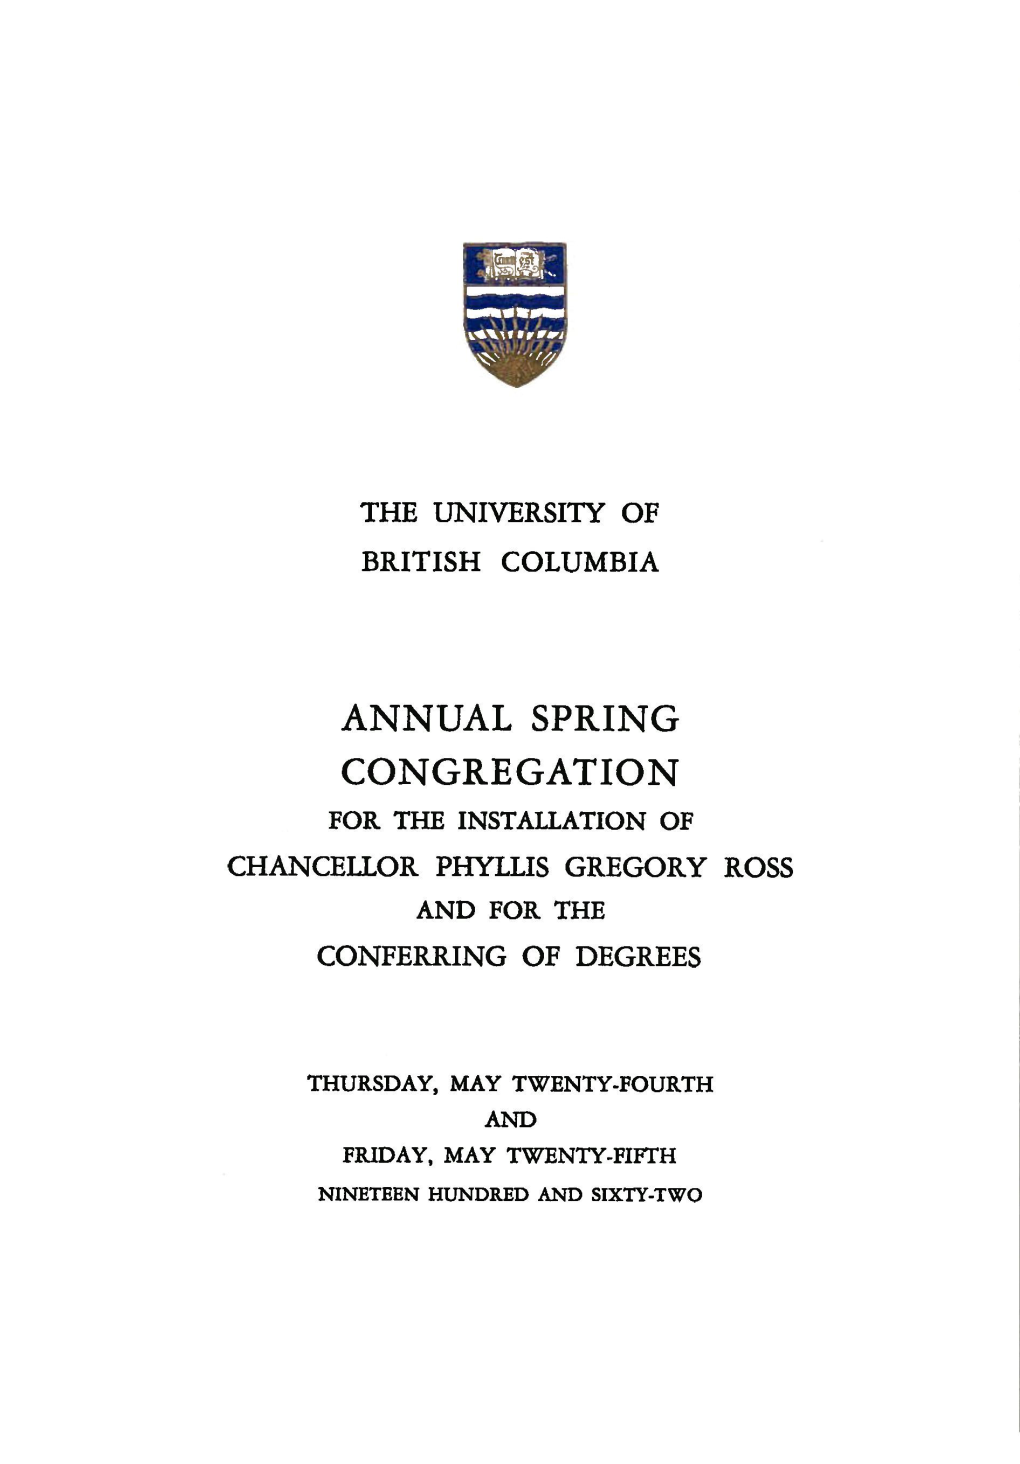 Annual Spring Congregation for the Installation of Chancellor Phyllis Gregory Ross and for the Conferring of Degrees